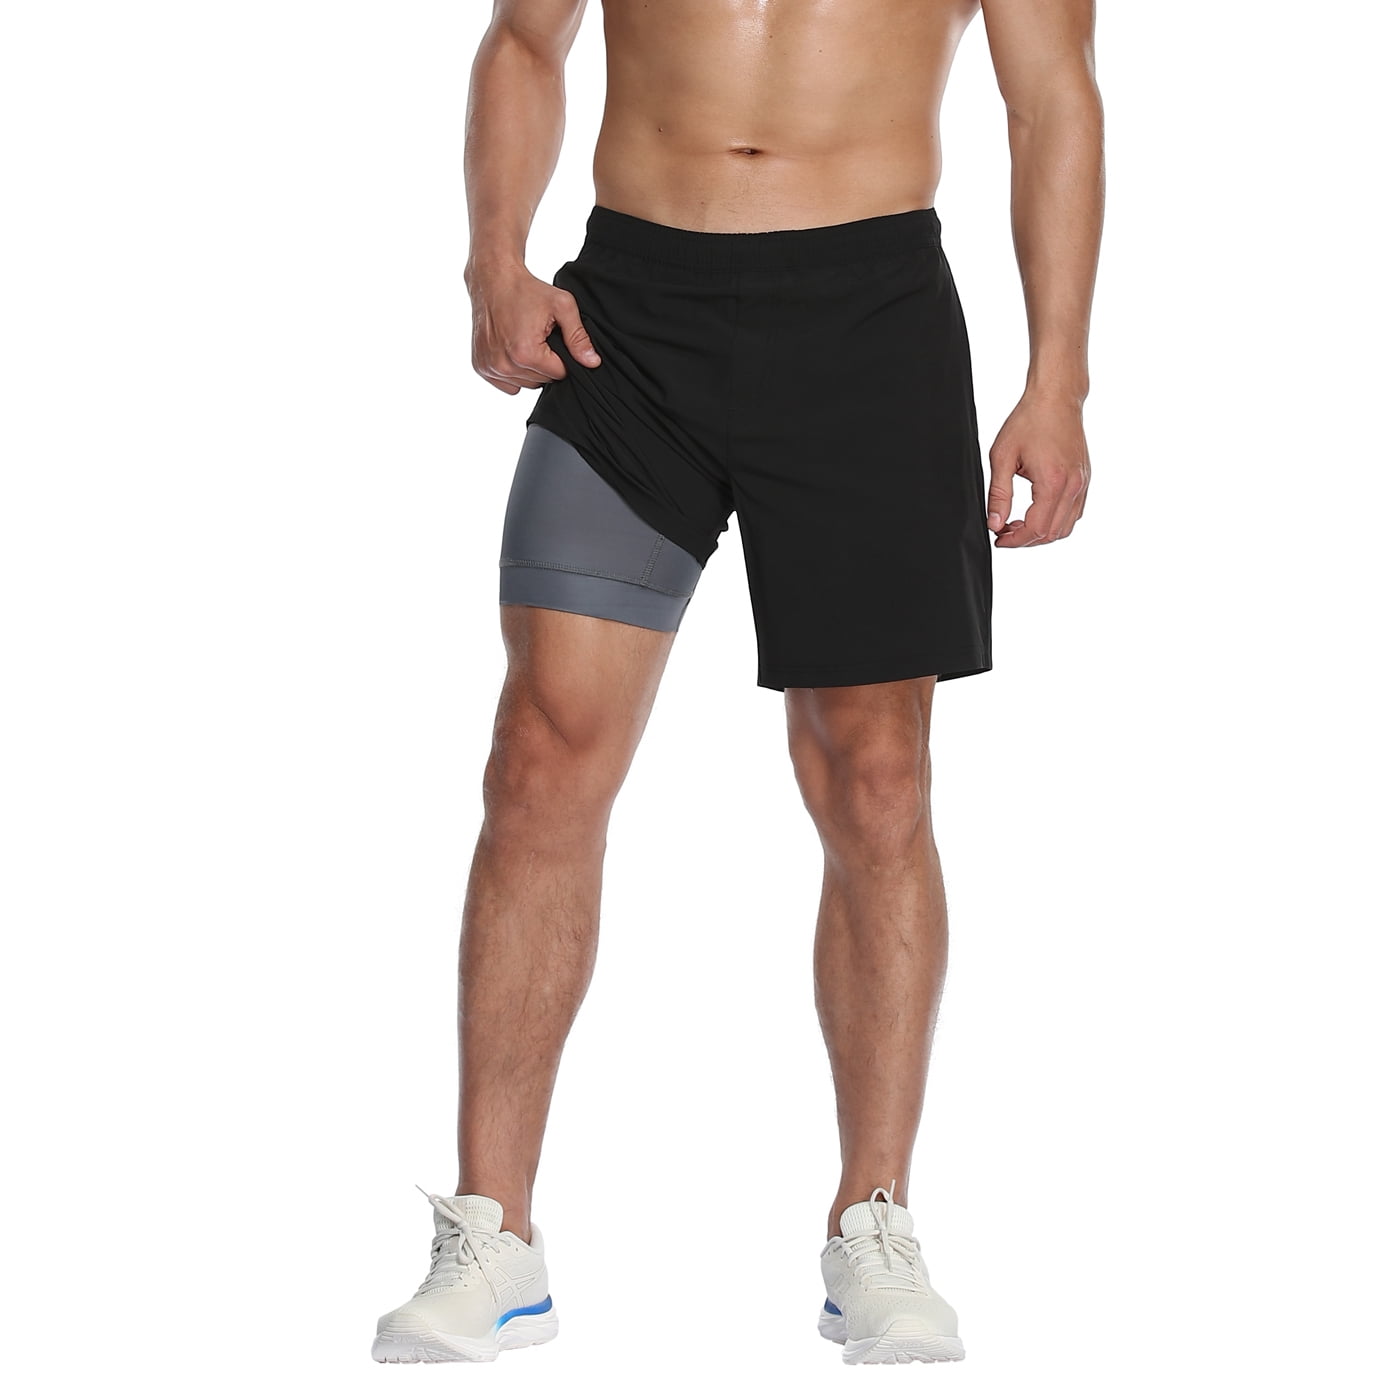 Crossfit Yoga Gym PRS Mens Perform+ Compression Shorts for Running HIIT